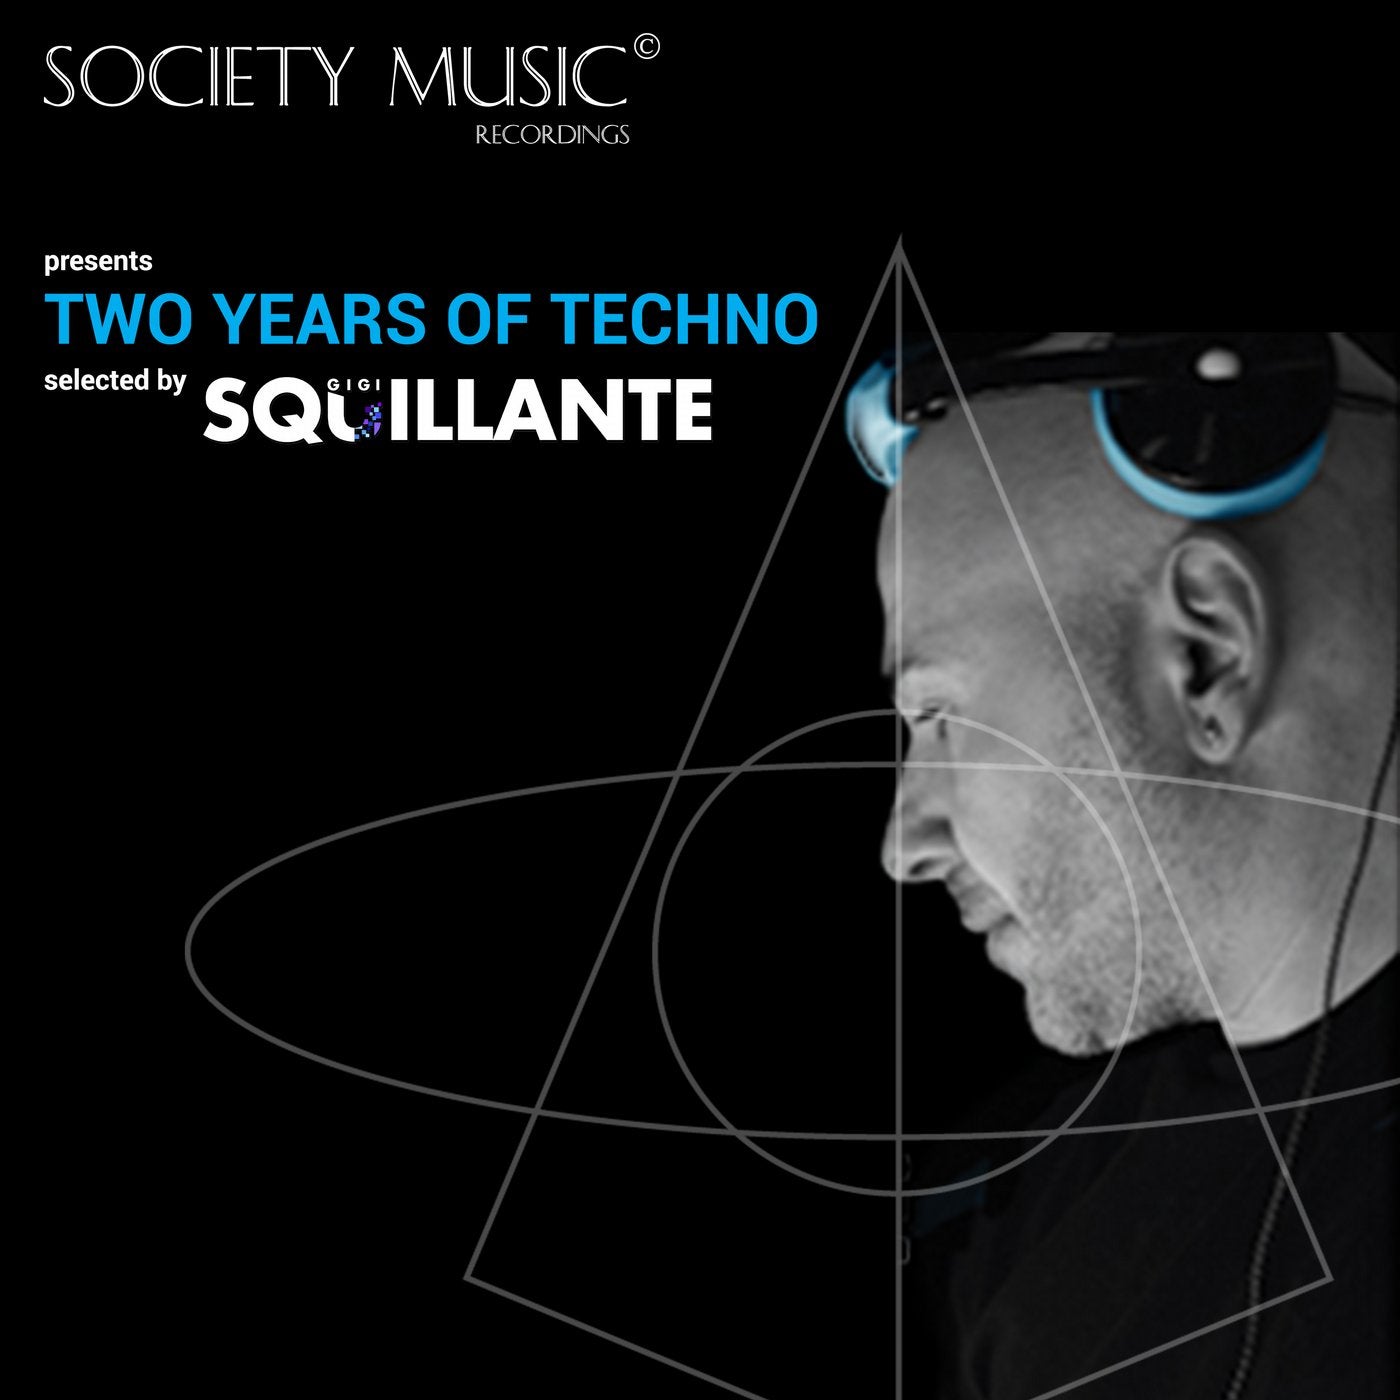 Two Years Of Techno